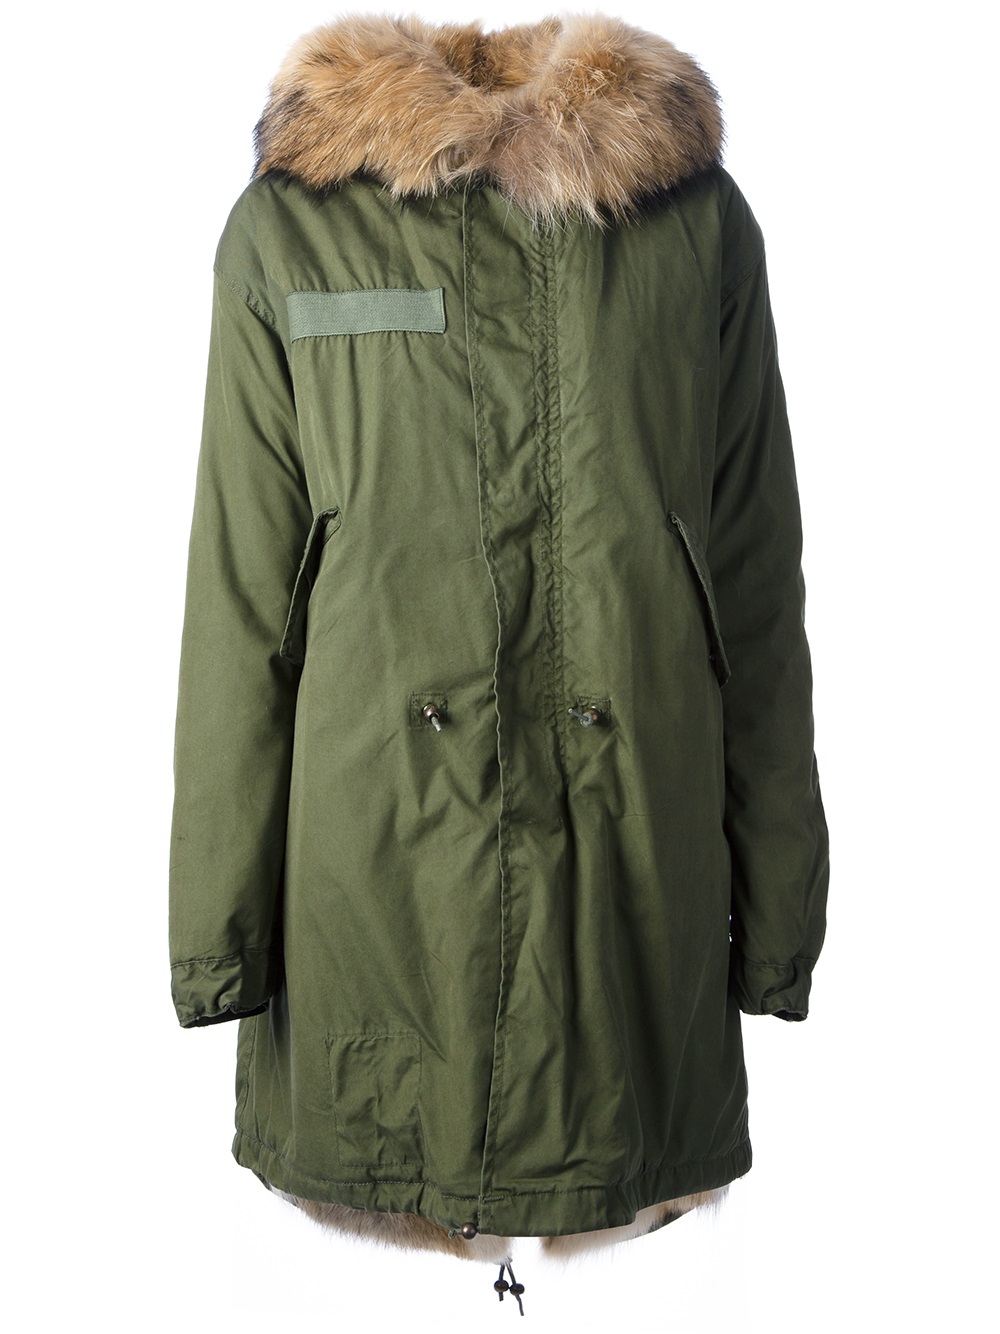 Lyst - Mr & Mrs Italy Hooded Parka in Green